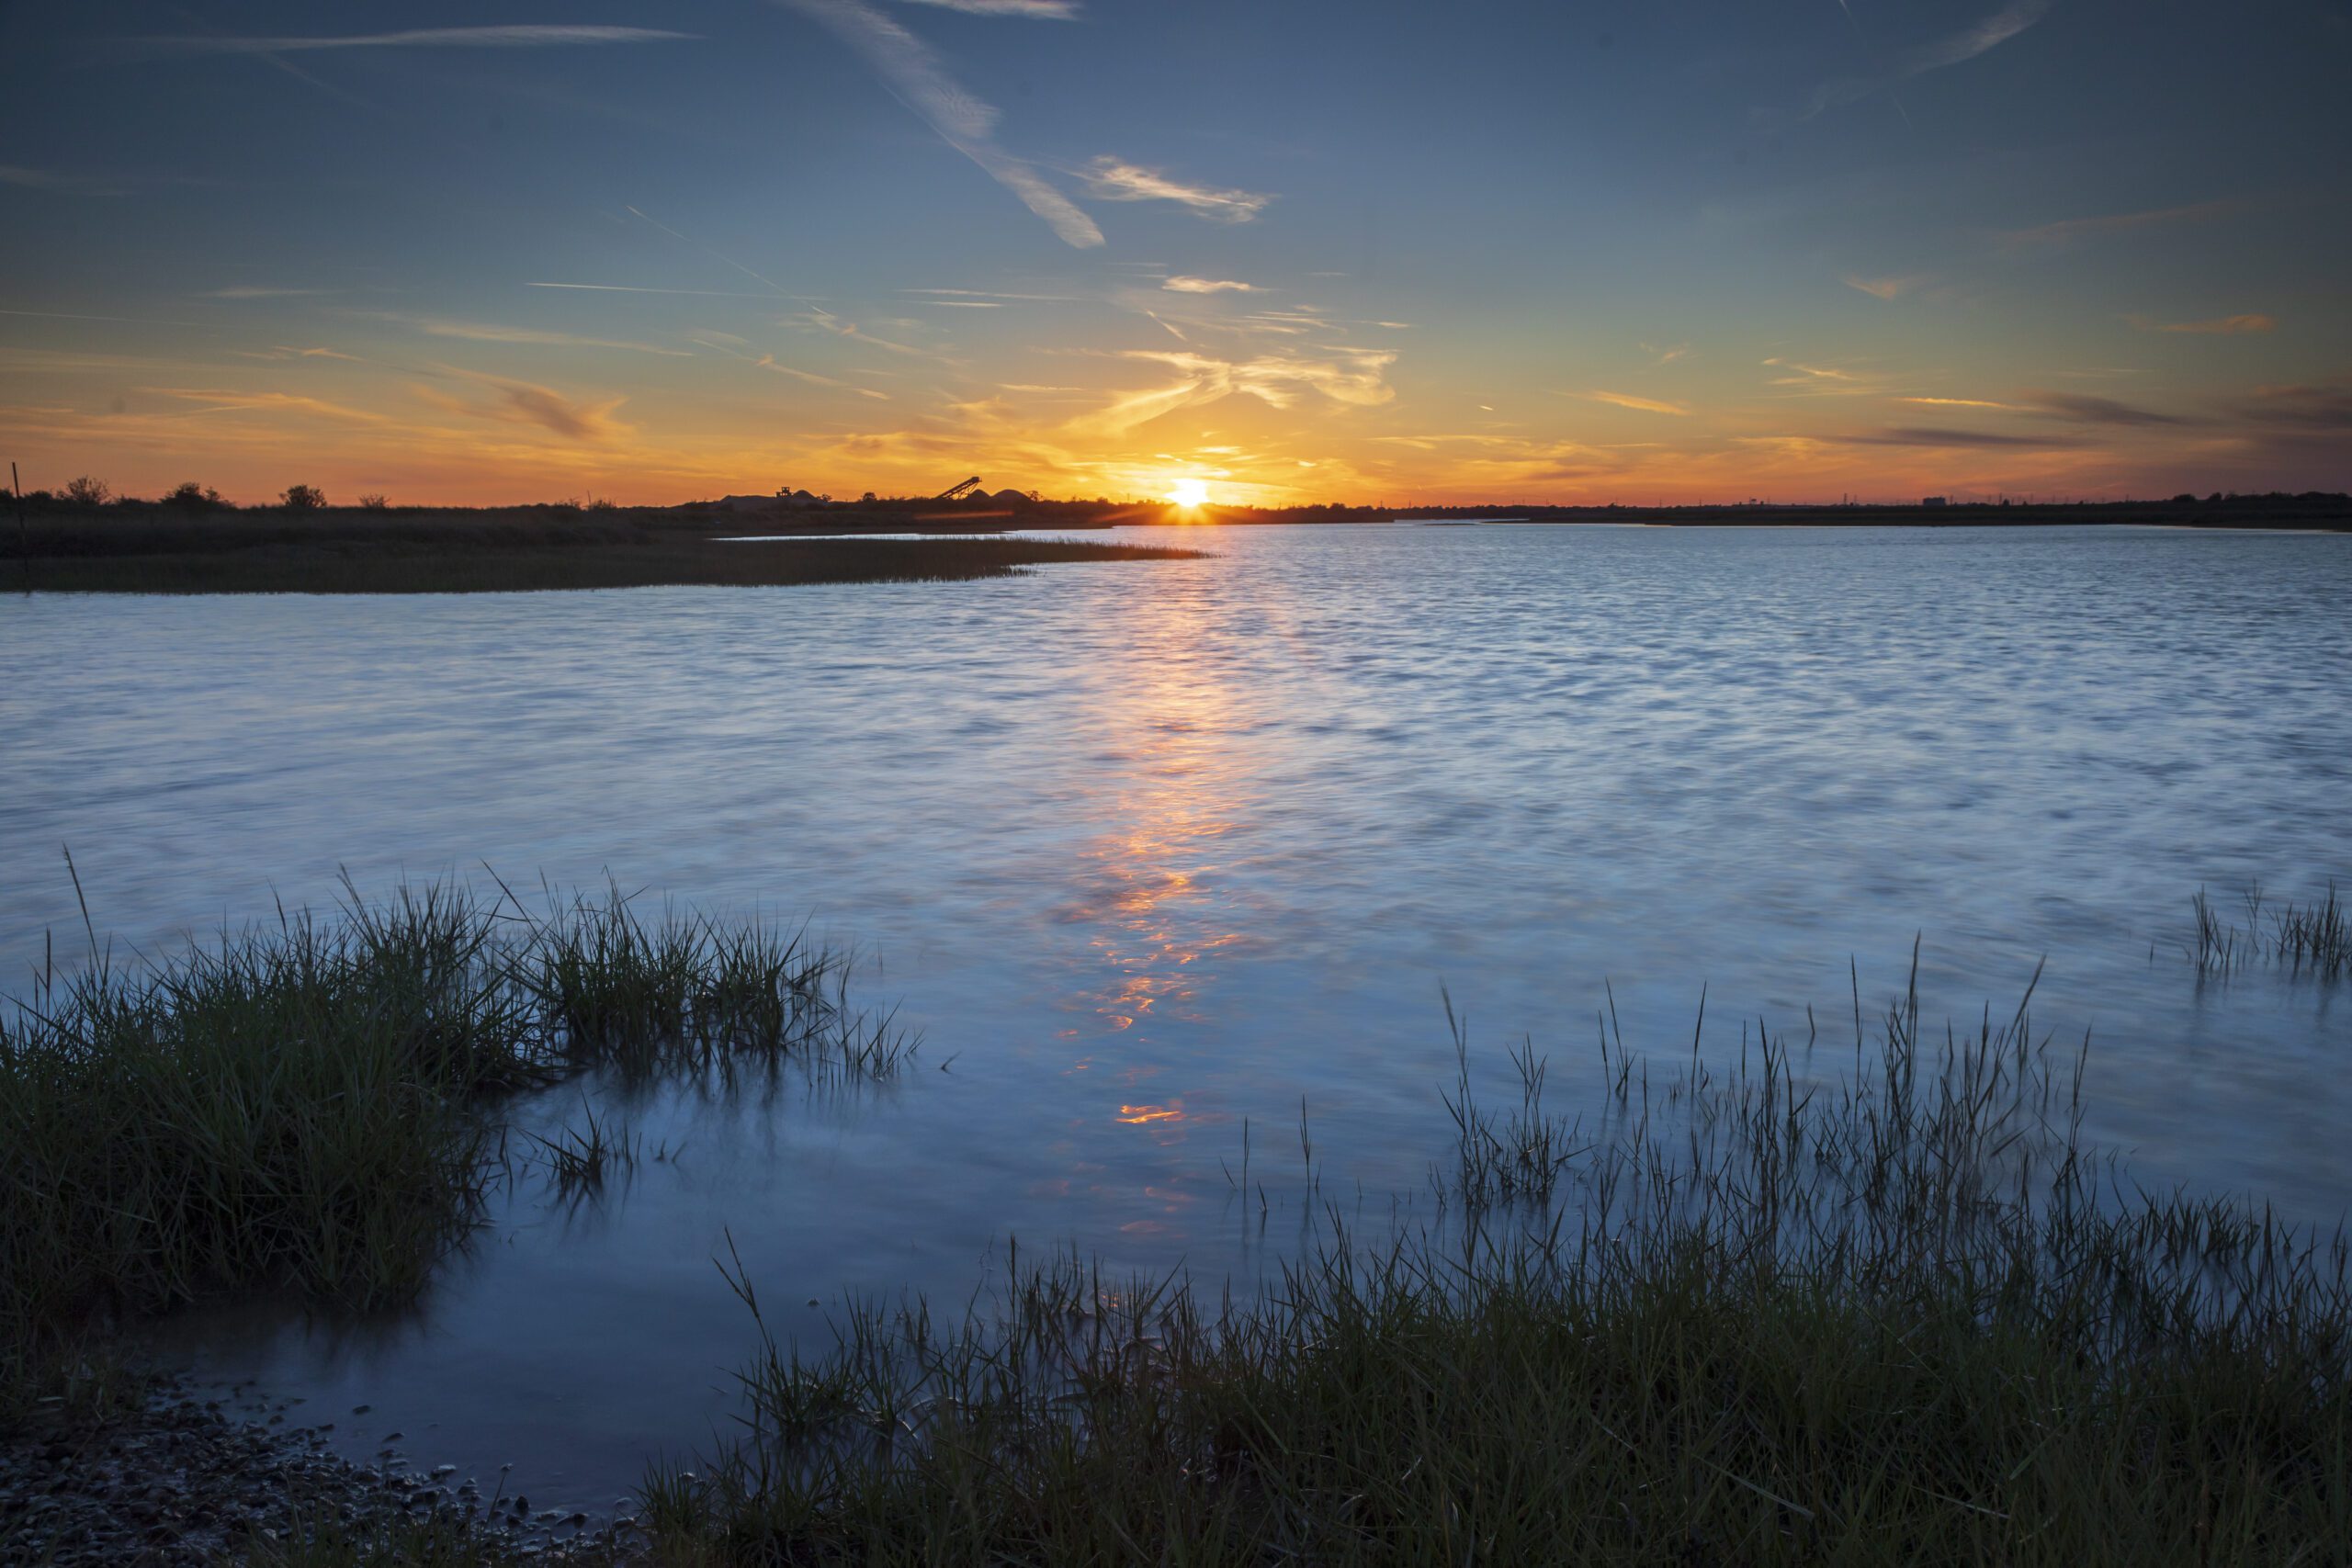 Sunset at Cliffe Pools